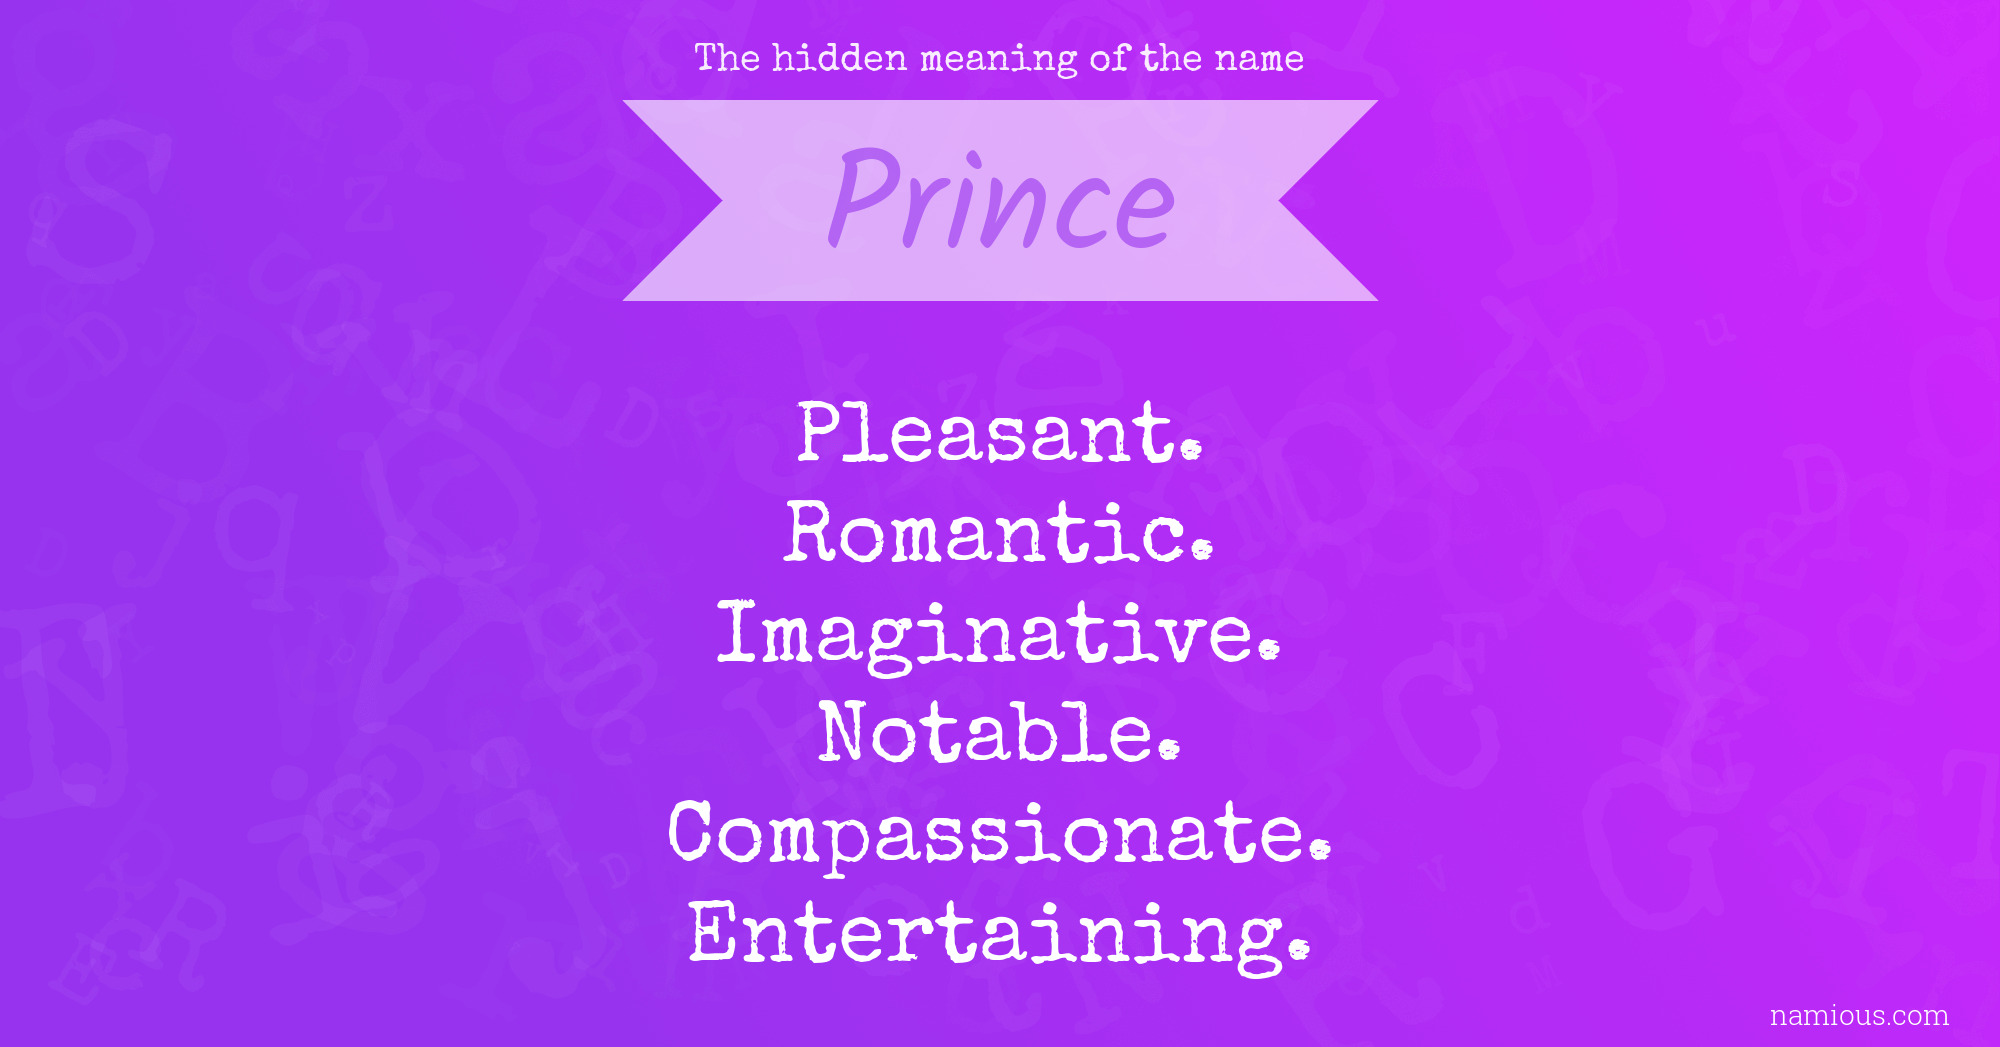 The hidden meaning of the name Prince